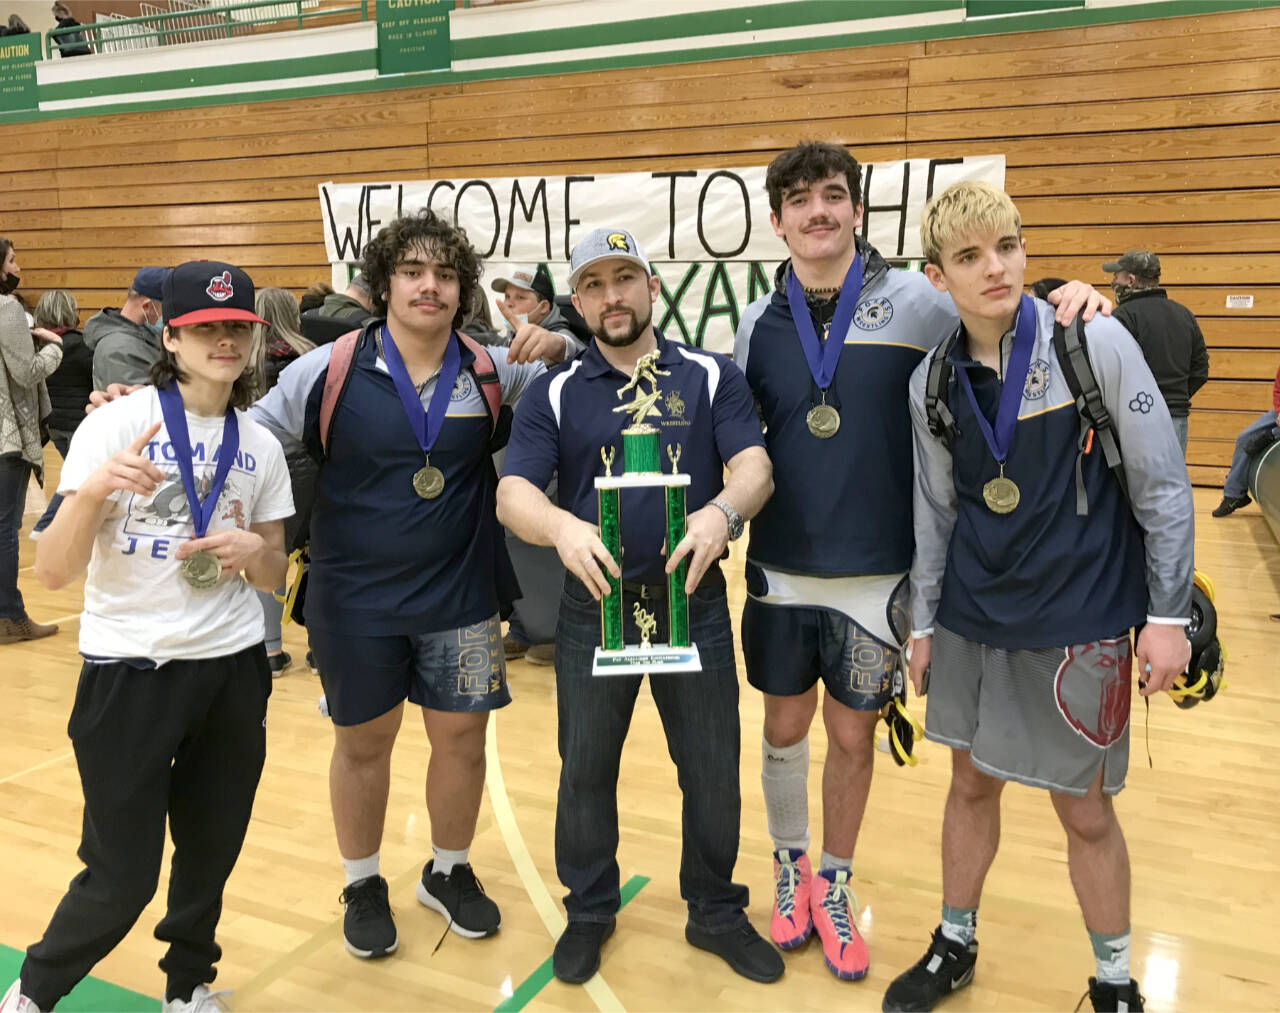 Forks individual champions Saturday at the Pat Alexander Tournament in Tumwater include from left, Matthew Montes (106 pounds), Sloan Tumaua (220 pounds), Asst. Coach Daniel Frishkorn, Hayden Queen (182 pounds) and Jake Weakley (160 pounds). (Forks wrestling team)